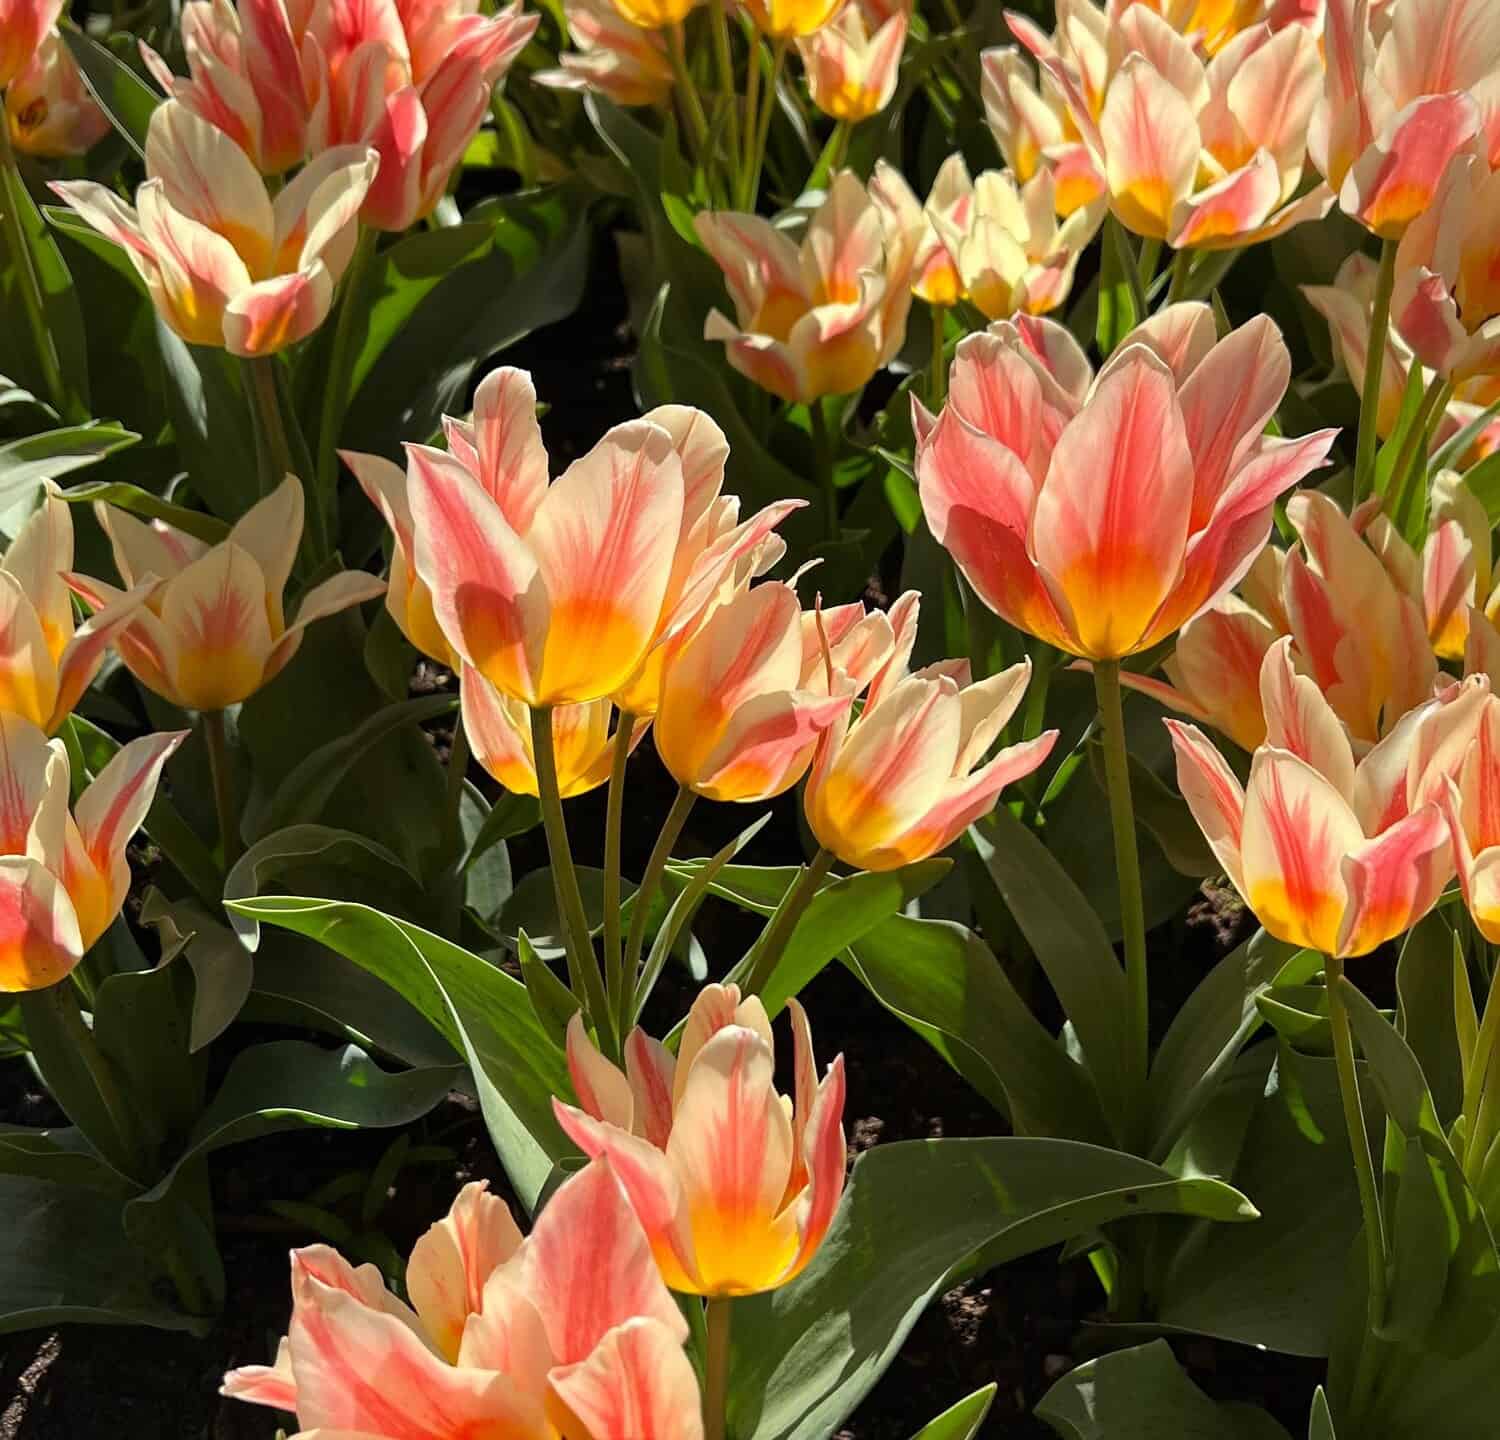 Varietal pink-yellow striped tulips with pointed petals in bloom. Keukenhof park.